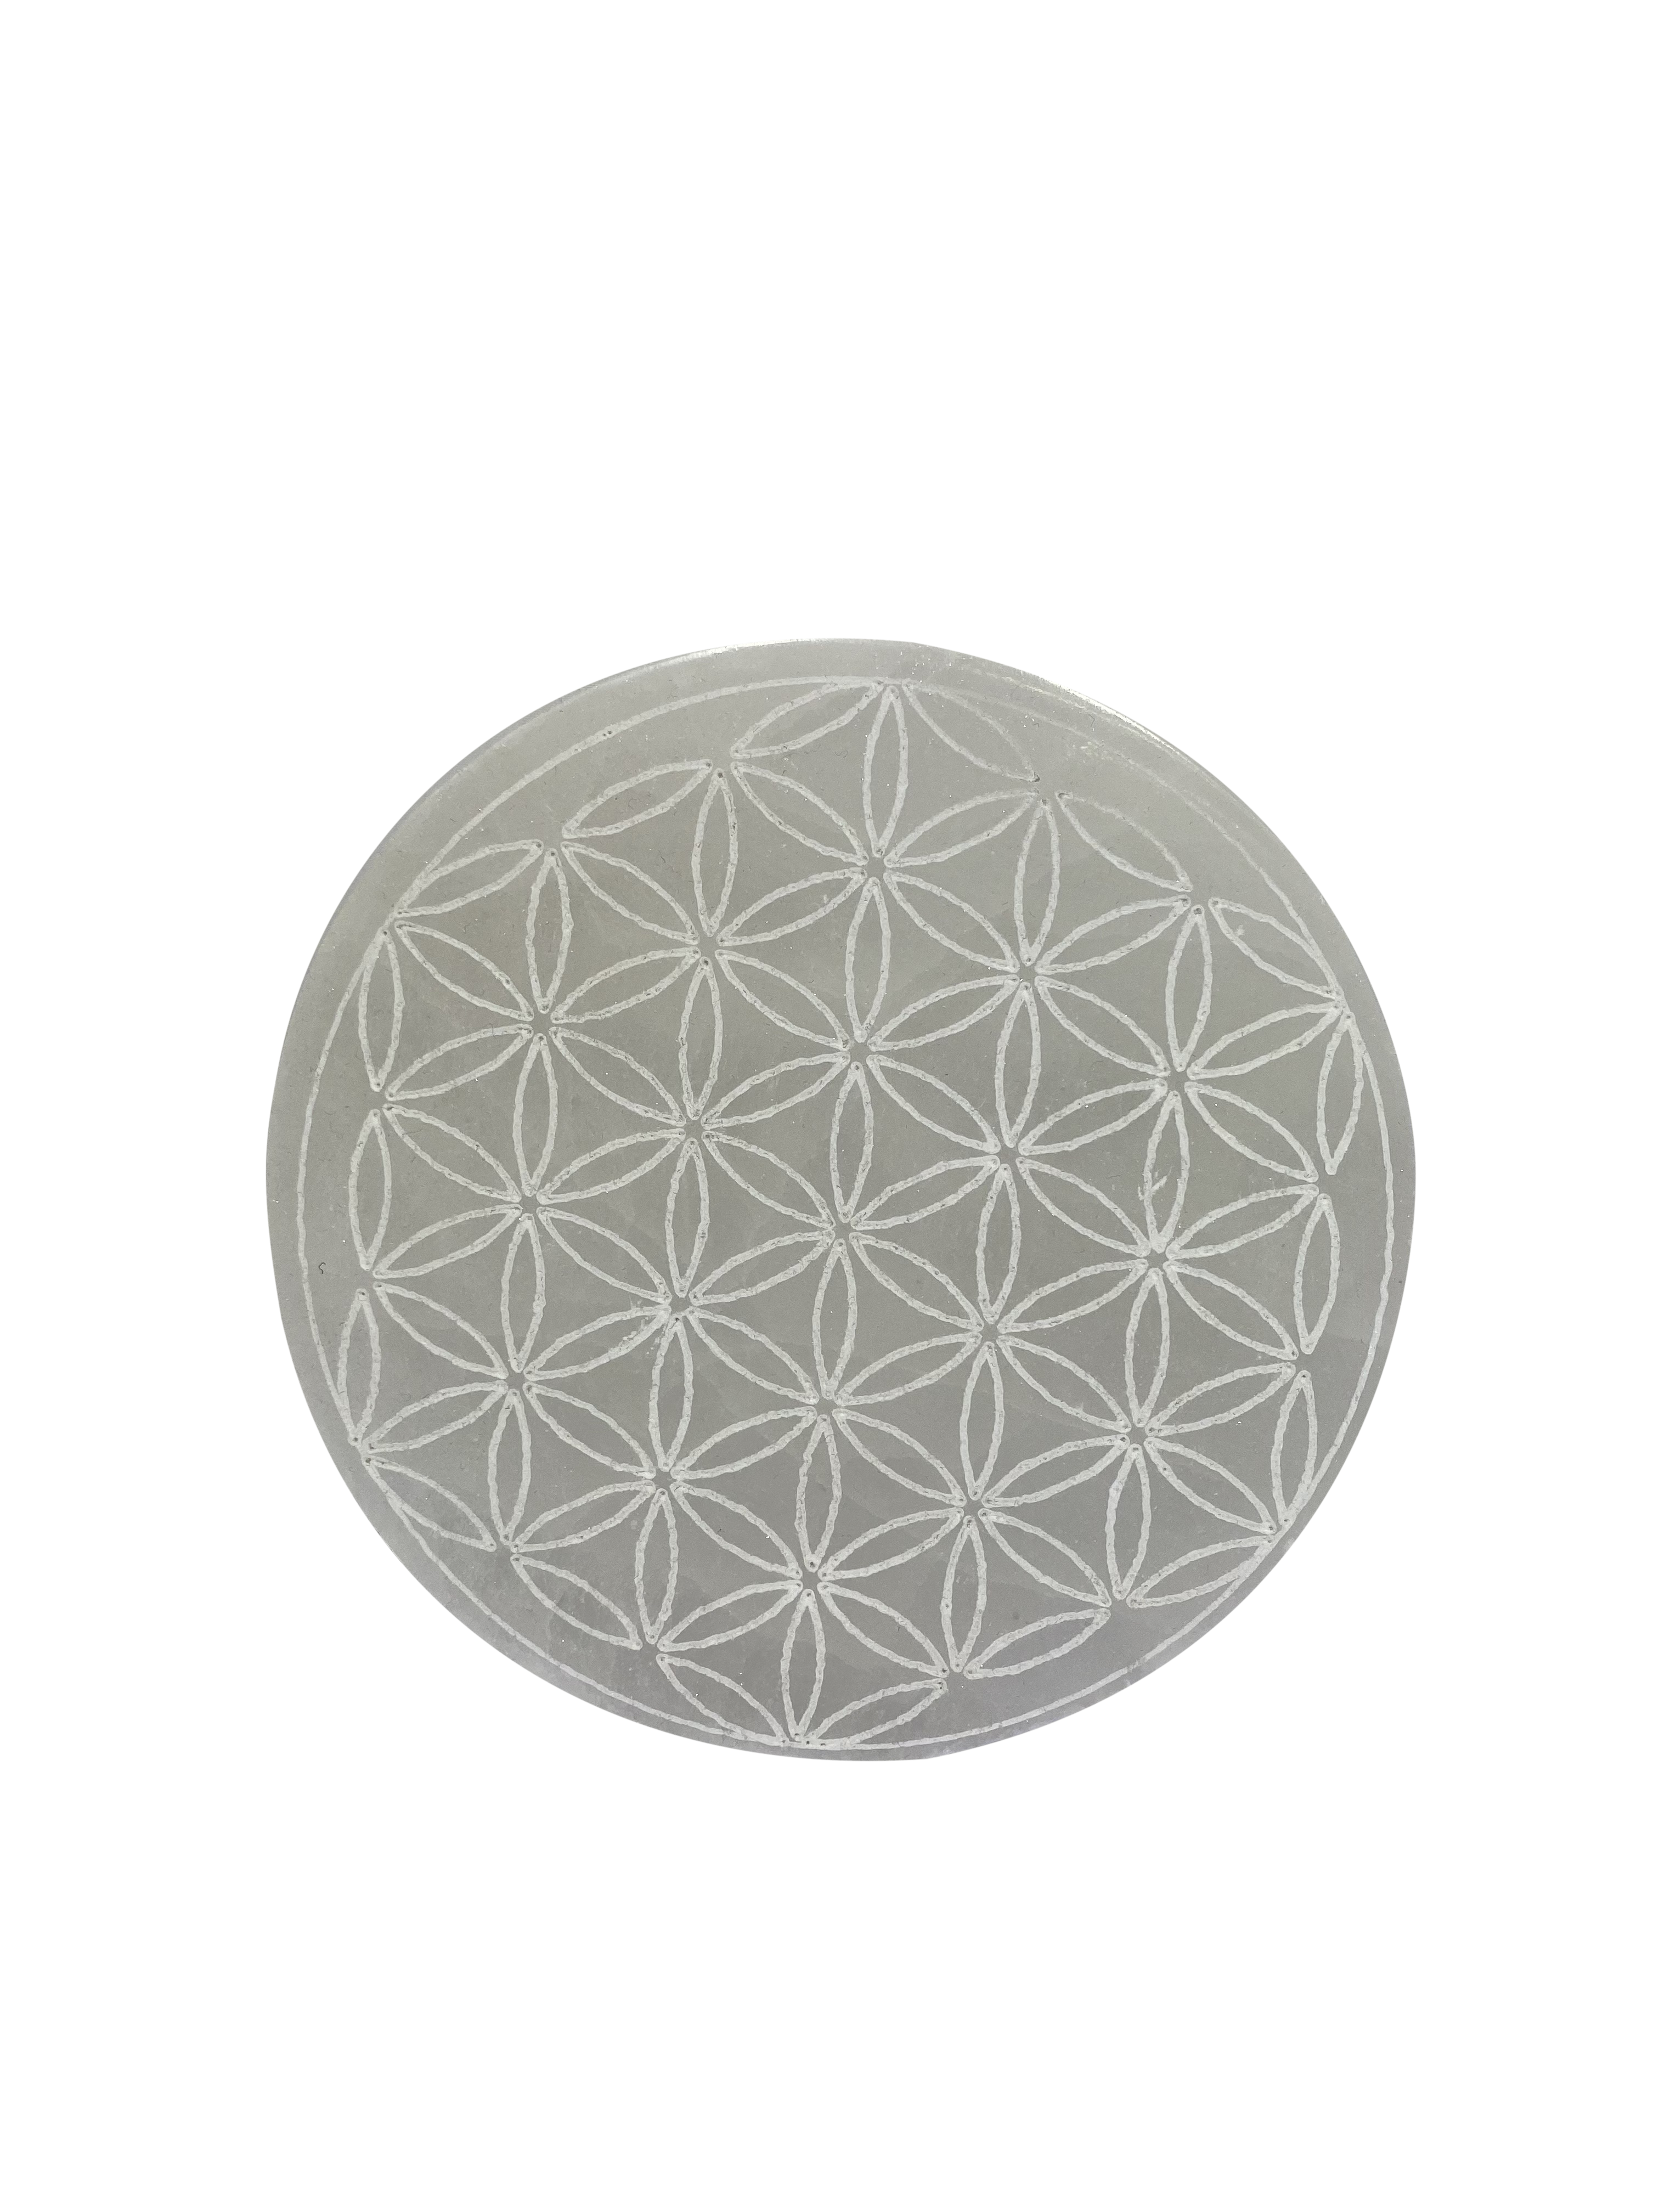 Flower of Life Selenite Charging Plate Crystals and Jewelry Holder